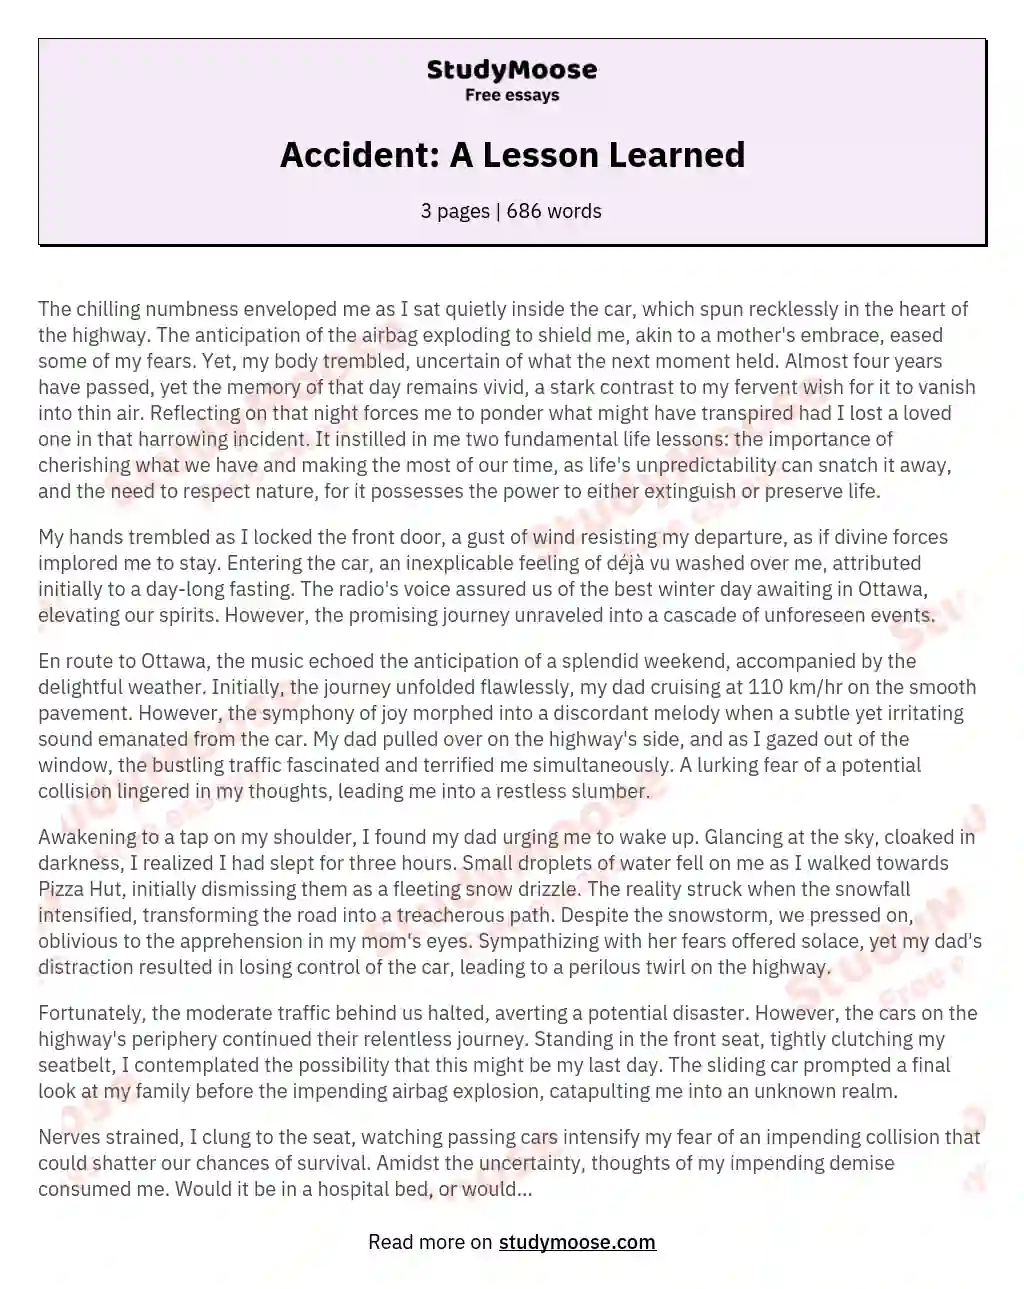 Accident: A Lesson Learned essay